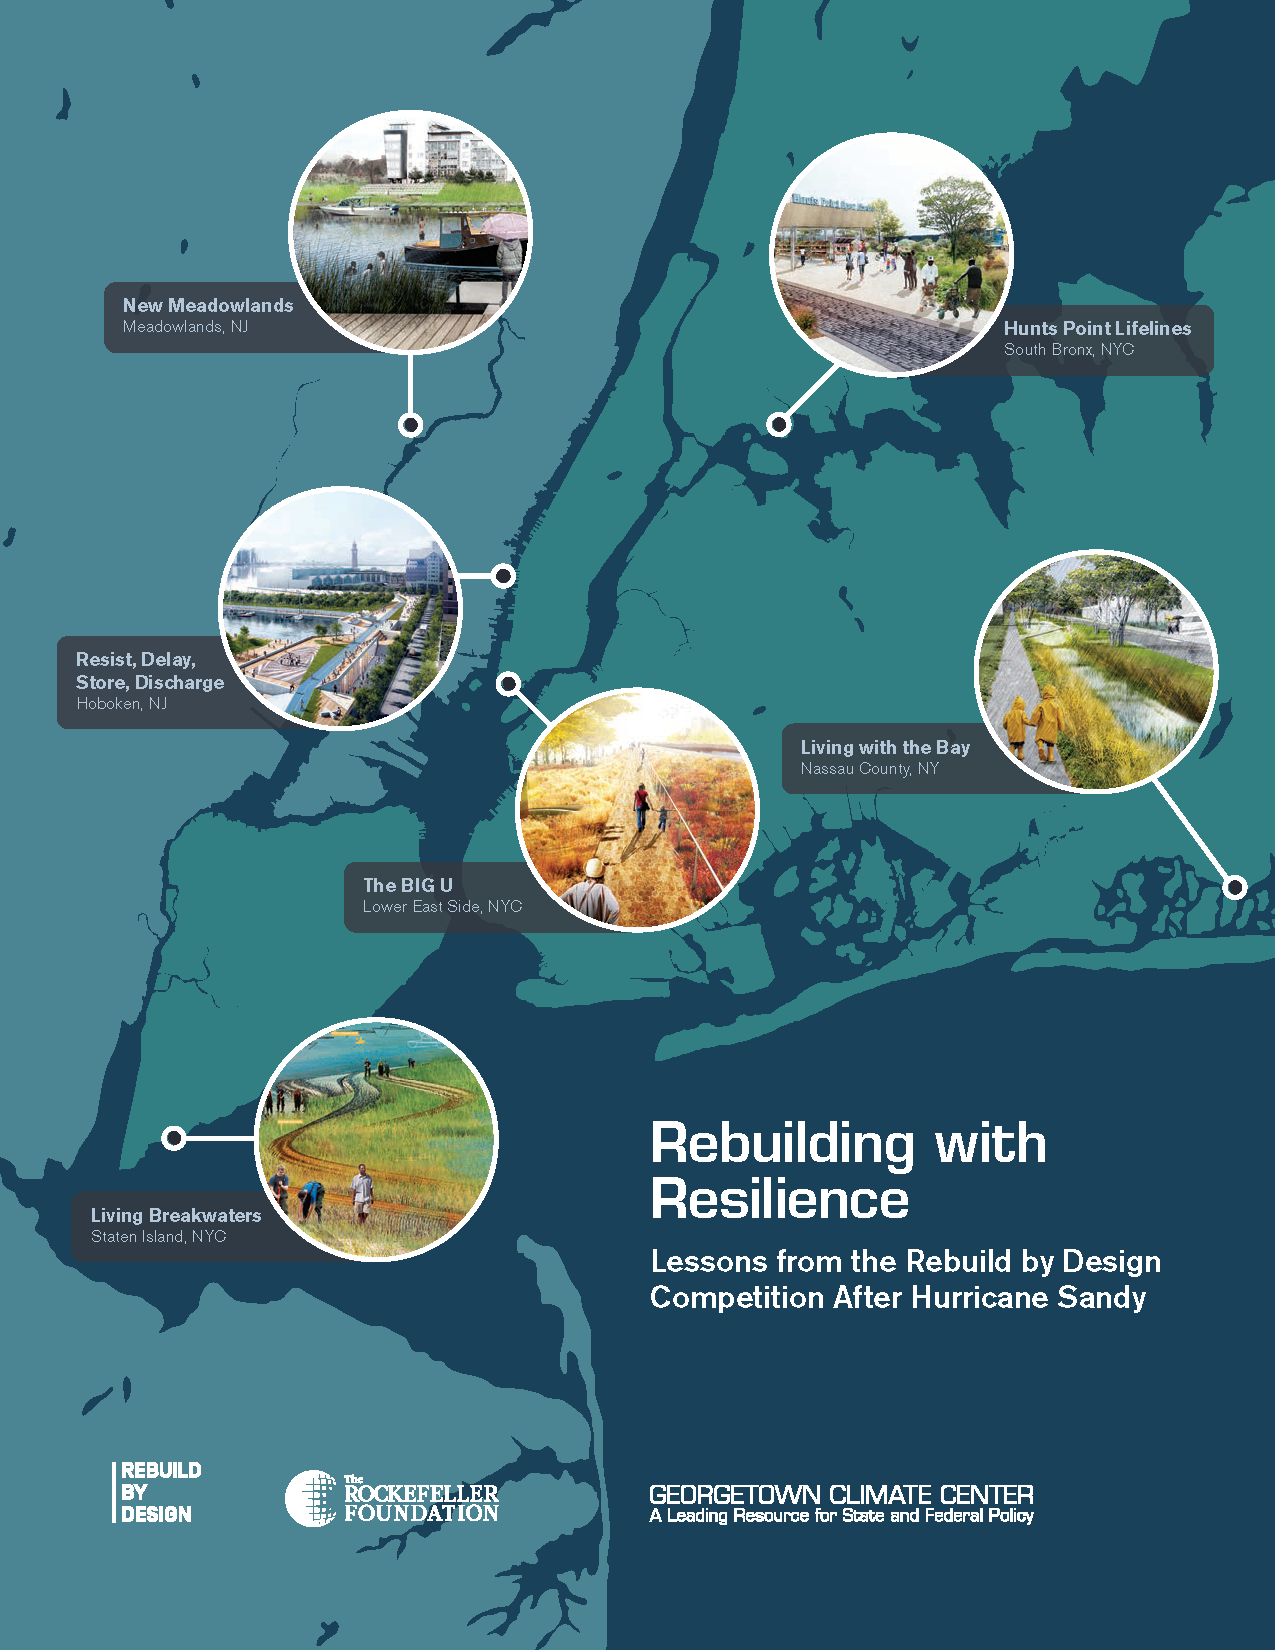 Rebuilding with Resilience: Lessons from the Rebuild by Design Competition After Hurricane Sandy